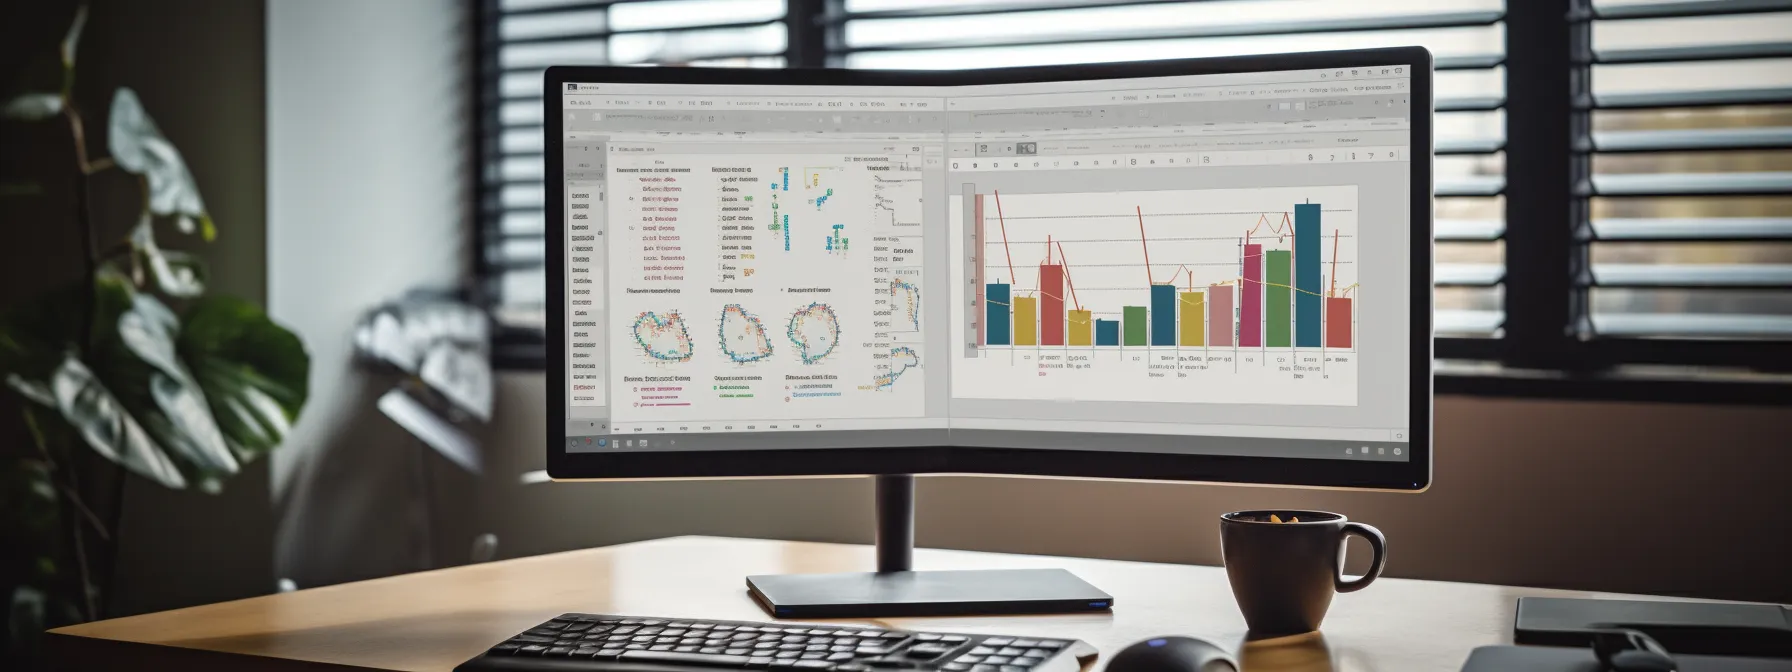 a close-up shot of a person using a keyword research tool on a computer screen, surrounded by charts and graphs representing keyword clustering and seo strategies.